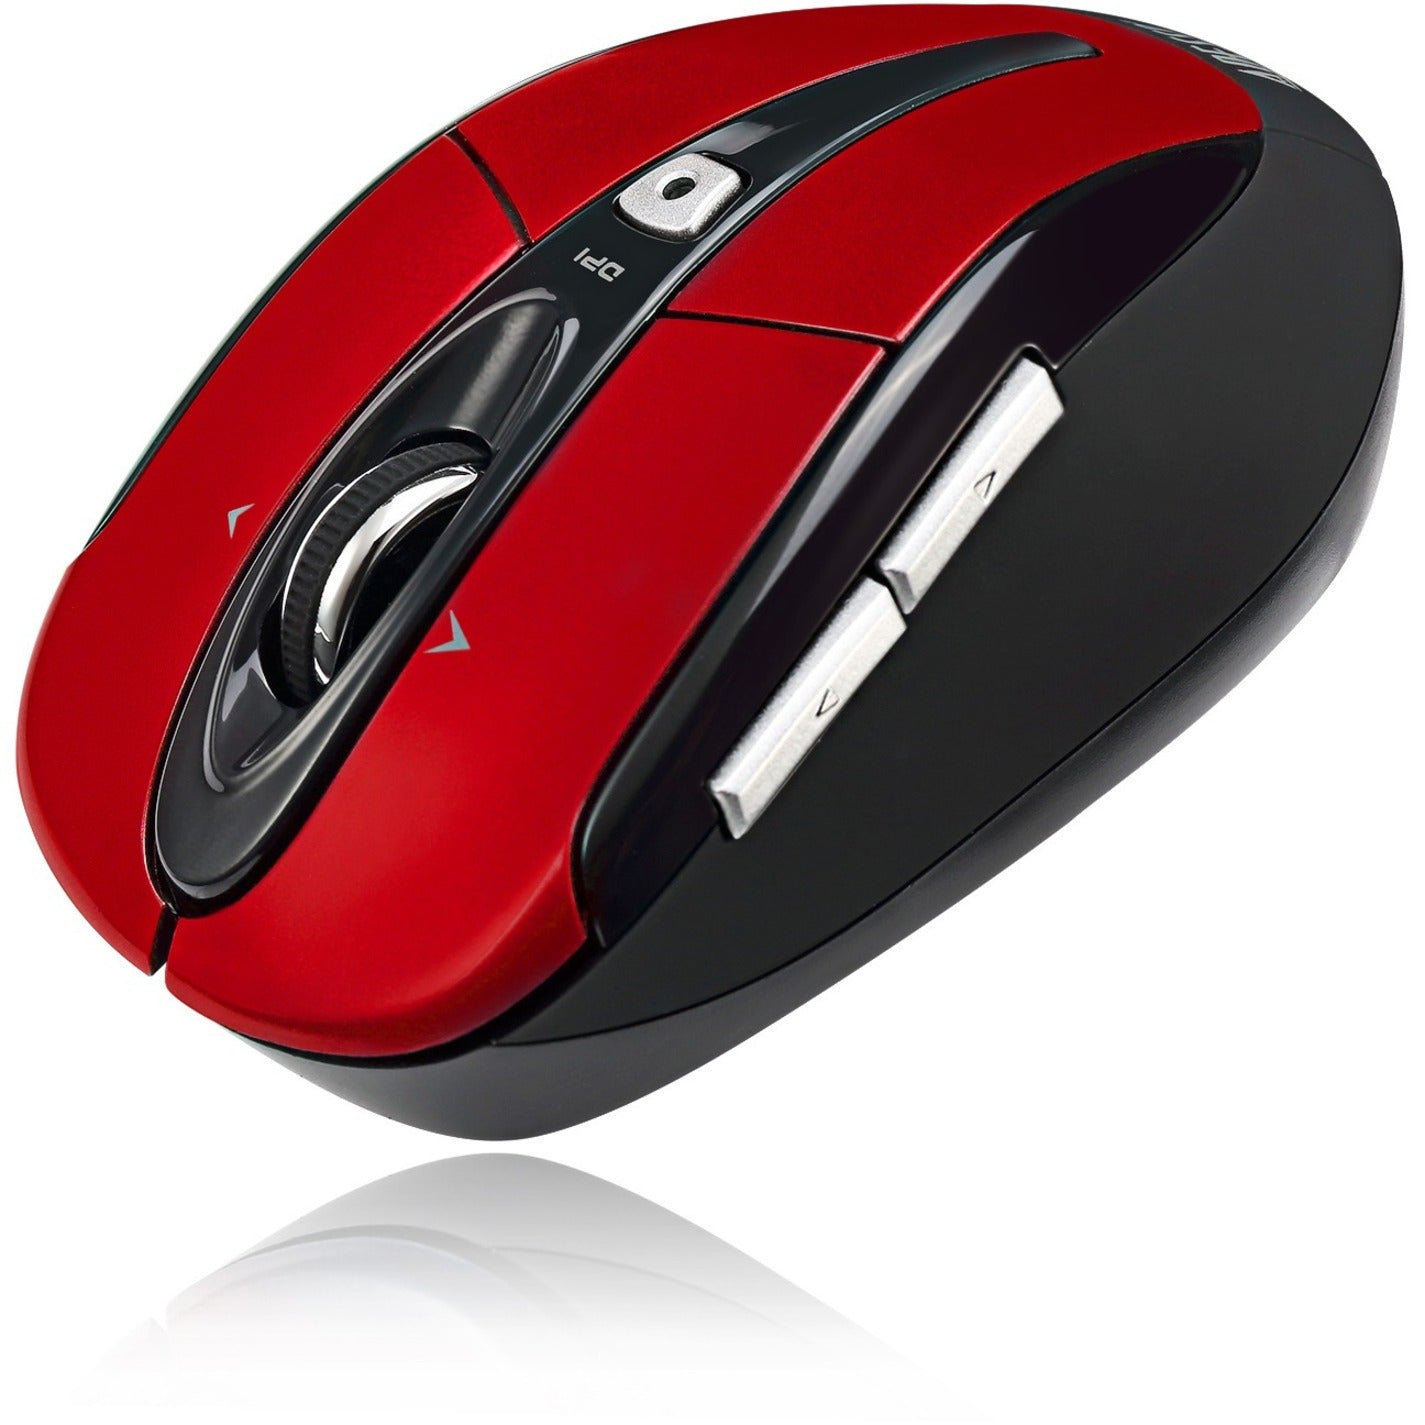 Adesso IMOUSES60R iMouse S60R 2.4 GHz Wireless Programmable Nano Mouse, Ergonomic Fit, 1600 dpi, Red